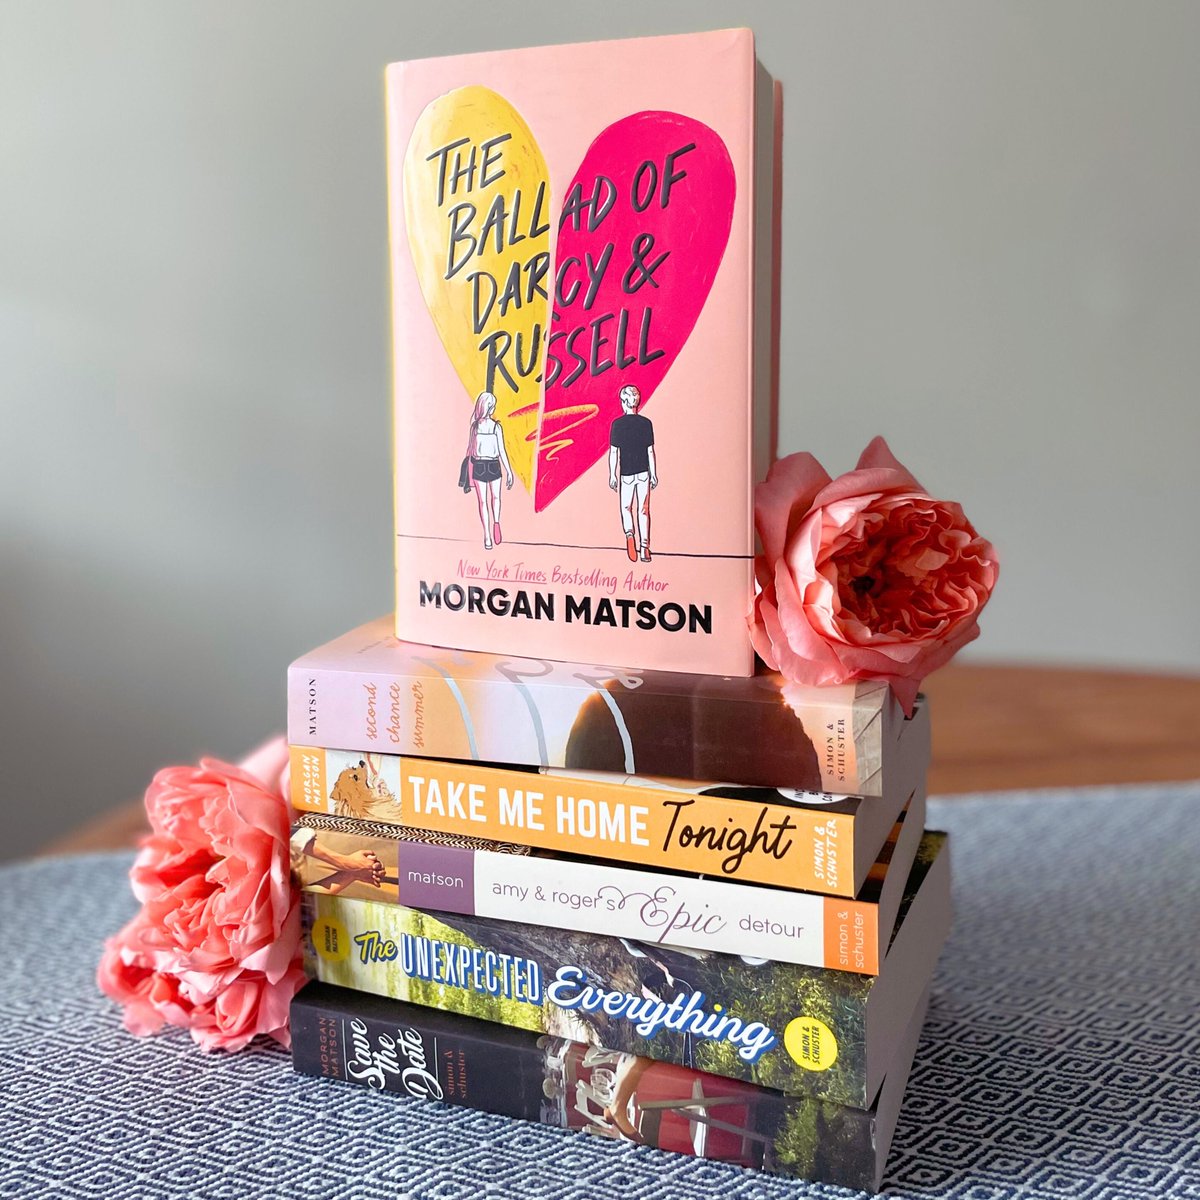 ICYMI we're closing out our #MorganMatsonMay celebration by giving you a chance to win a collection of signed @morgan_m romances! Get all the details and enter for a chance to win here: spr.ly/6015jWvrL 

Rules: spr.ly/6016jWvTK